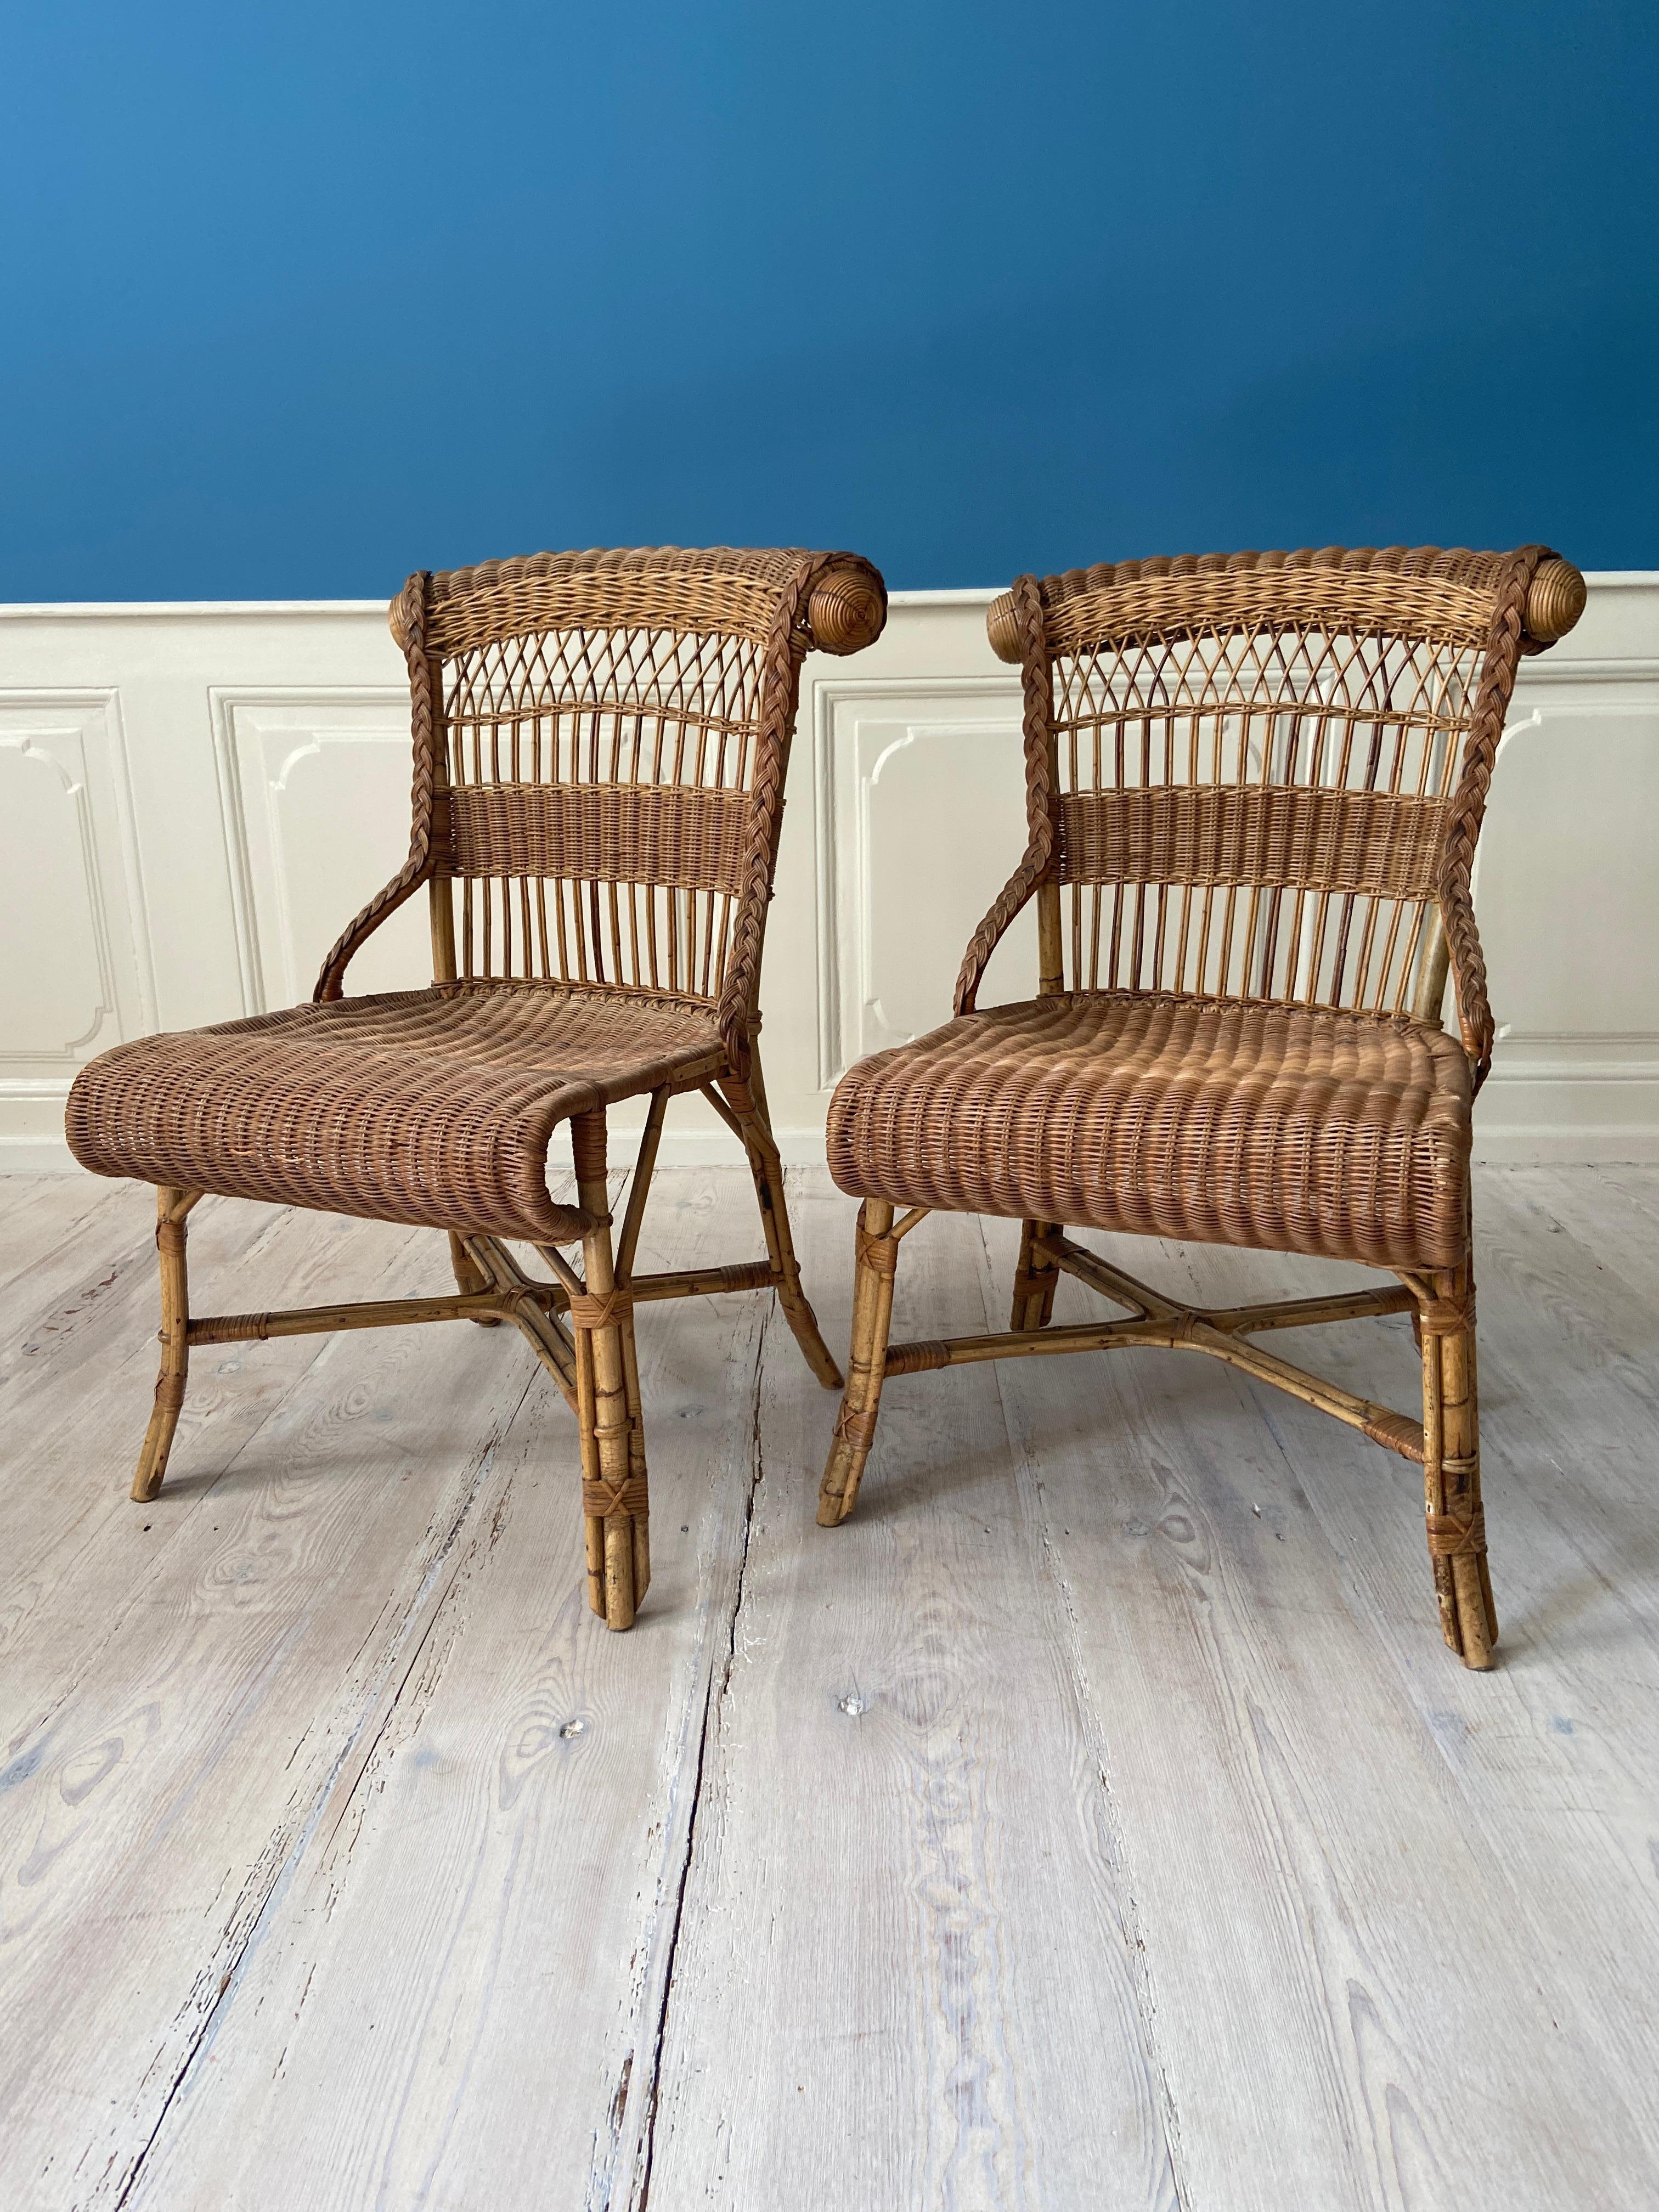 French Vintage Rattan Chairs with Elegant Details, France, 1940s